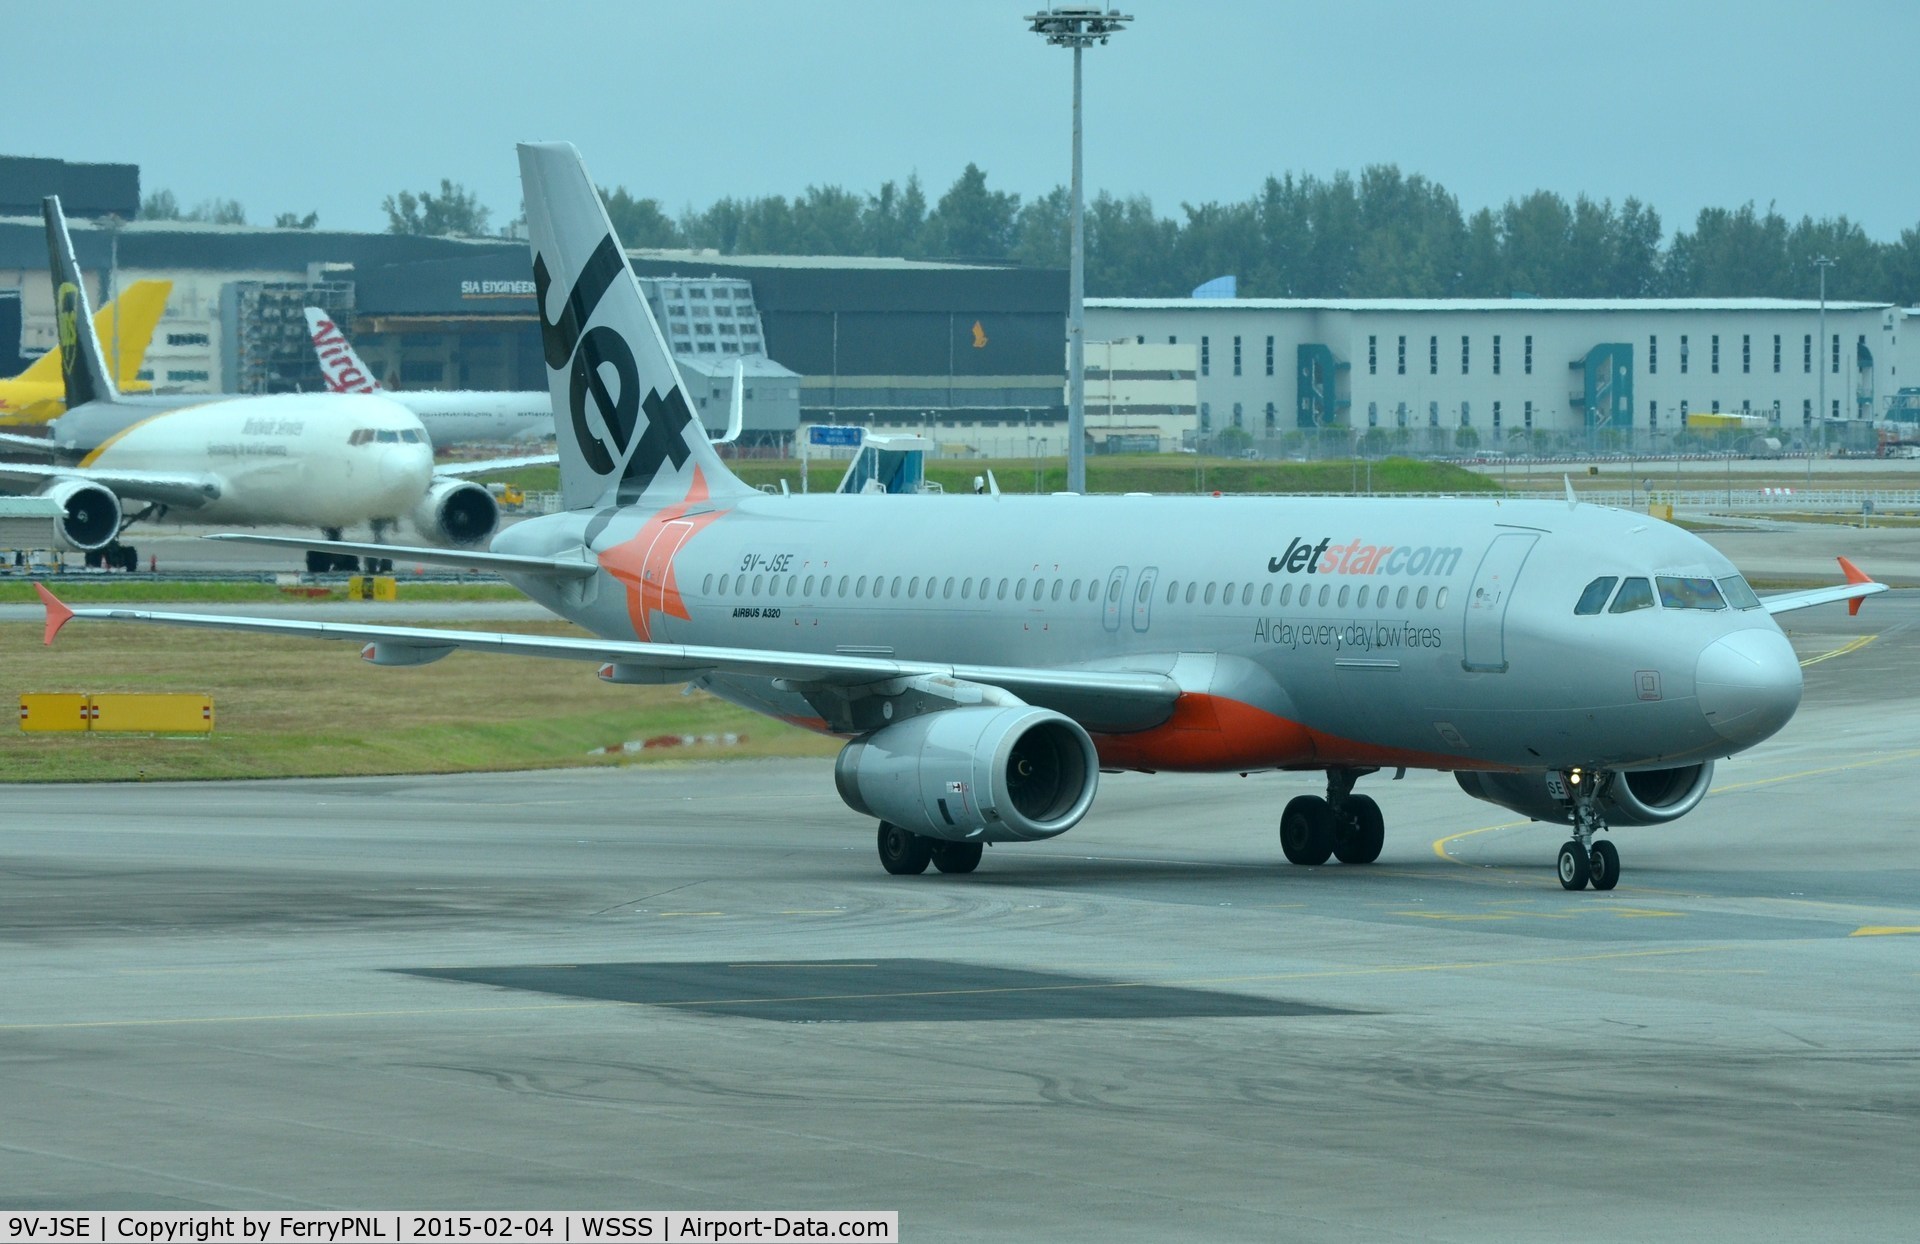 9V-JSE, 2005 Airbus A320-232 C/N 2423, Jetstar A320 taxying in.